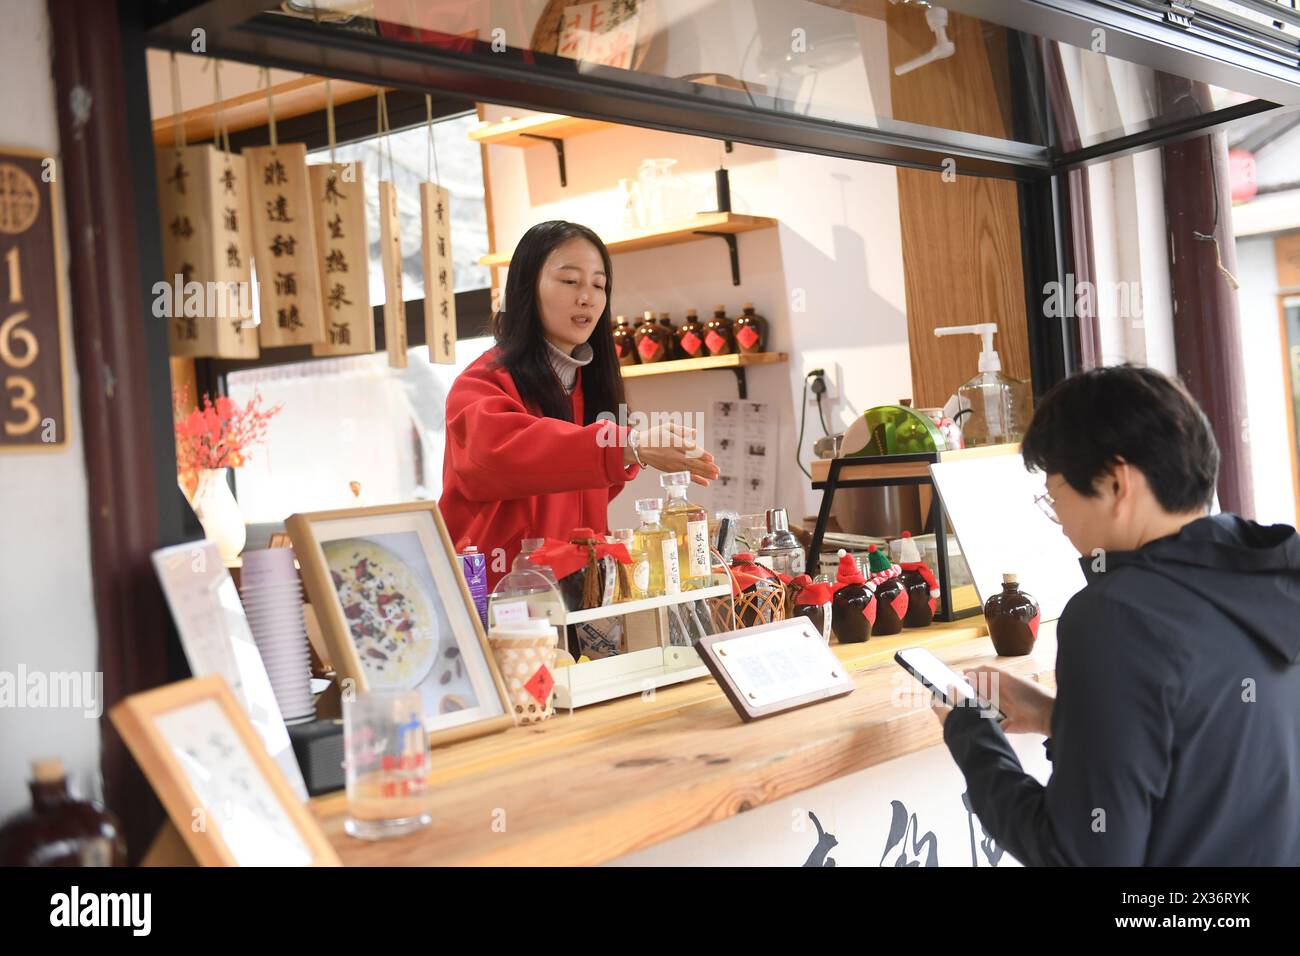 (240425) -- SHAOXING, April 25, 2024 (Xinhua) -- A clerk guides a customer to pay via her mobile phone for specialty coffee flavored with yellow rice wine at a store in Cangqiao Straight Street in Shaoxing, east China's Zhejiang Province, Feb. 20, 2024. Cangqiao Zhijie, literally translated as 'Cangqiao Straight Street,' is a historical and cultural site featuring ancient houses of unique style. Covering an area of 0.064 square kilometers, the 1,500 meters long street could be traced back to the Song Dynasty (960-1279). Restoration and protection efforts have been ongoing here since the 1990s. Stock Photo